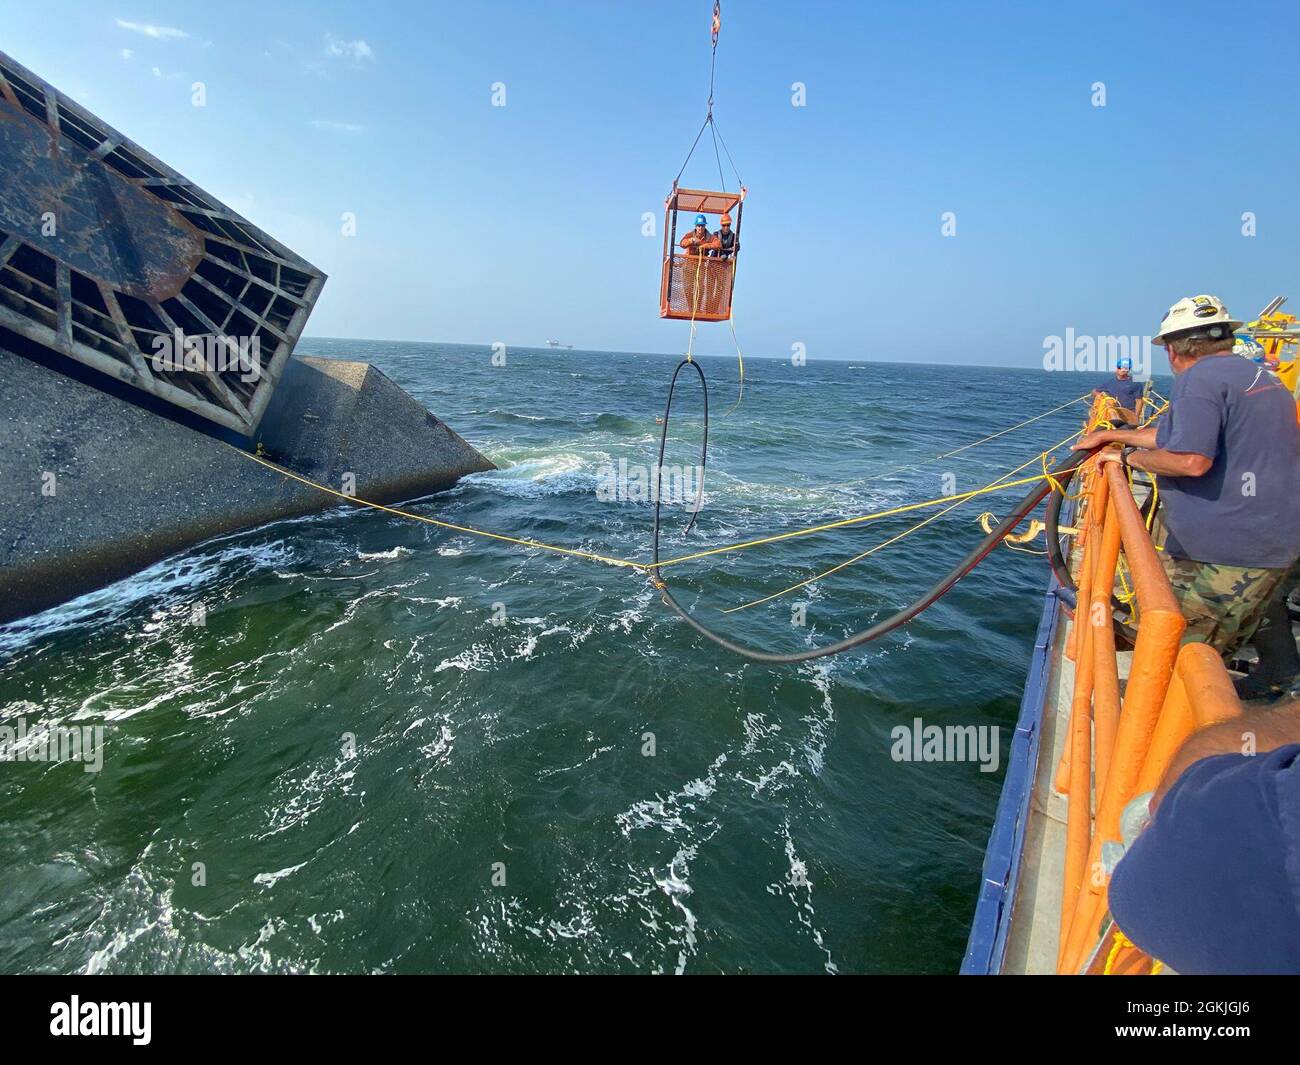 Contacted salvage divers transport a hose to the SEACOR Power fuel tank to start removing the fuel, May 3, 2021, off Port Fourchon, Louisiana. Good weather conditions are imperative for diver safety and smooth, steady operations. Stock Photo